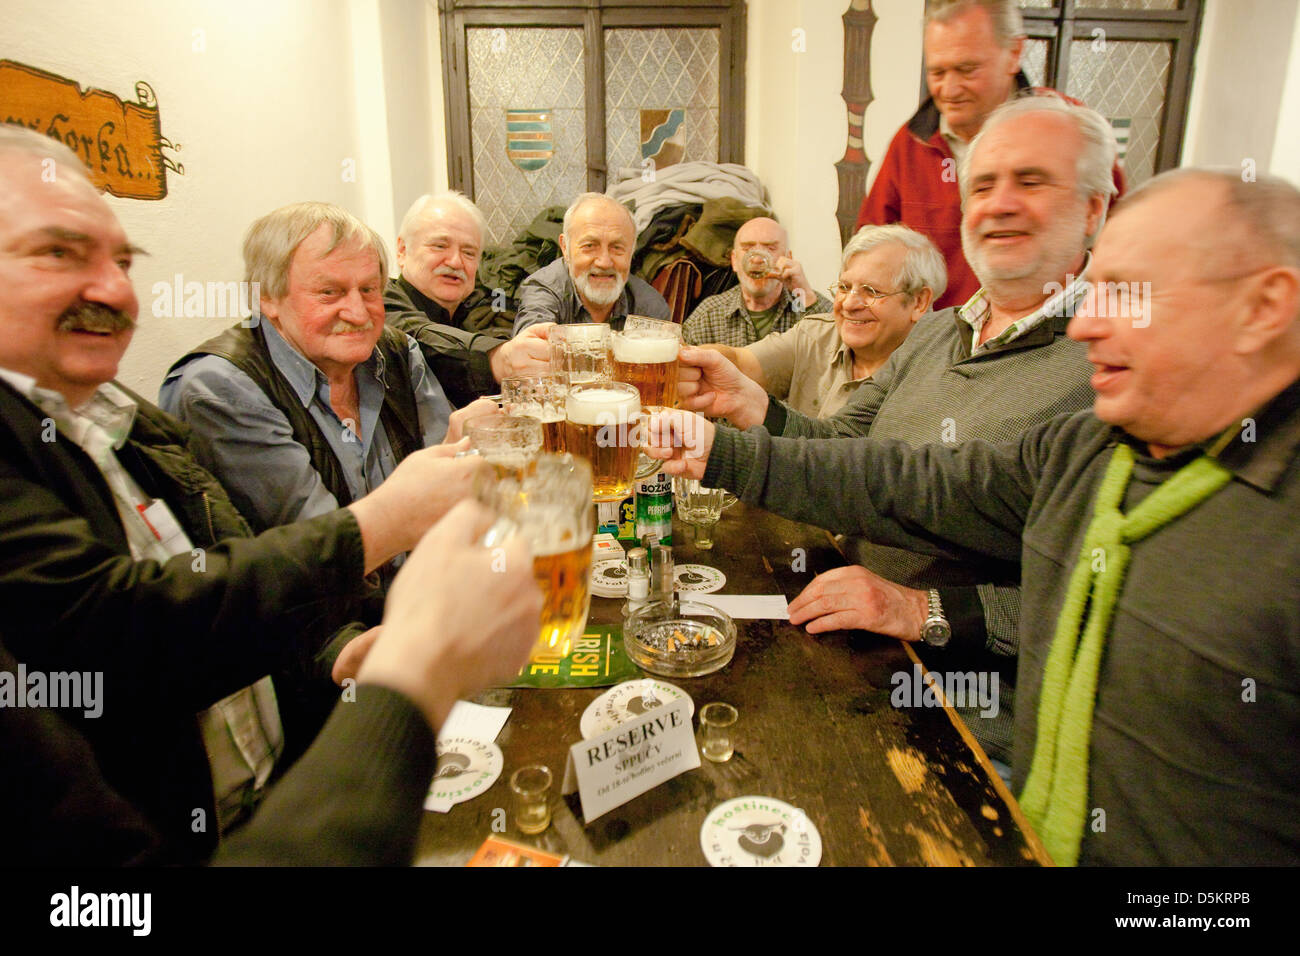 Prague - friends in a traditional Czech pub toasting with beer. Stock Photo